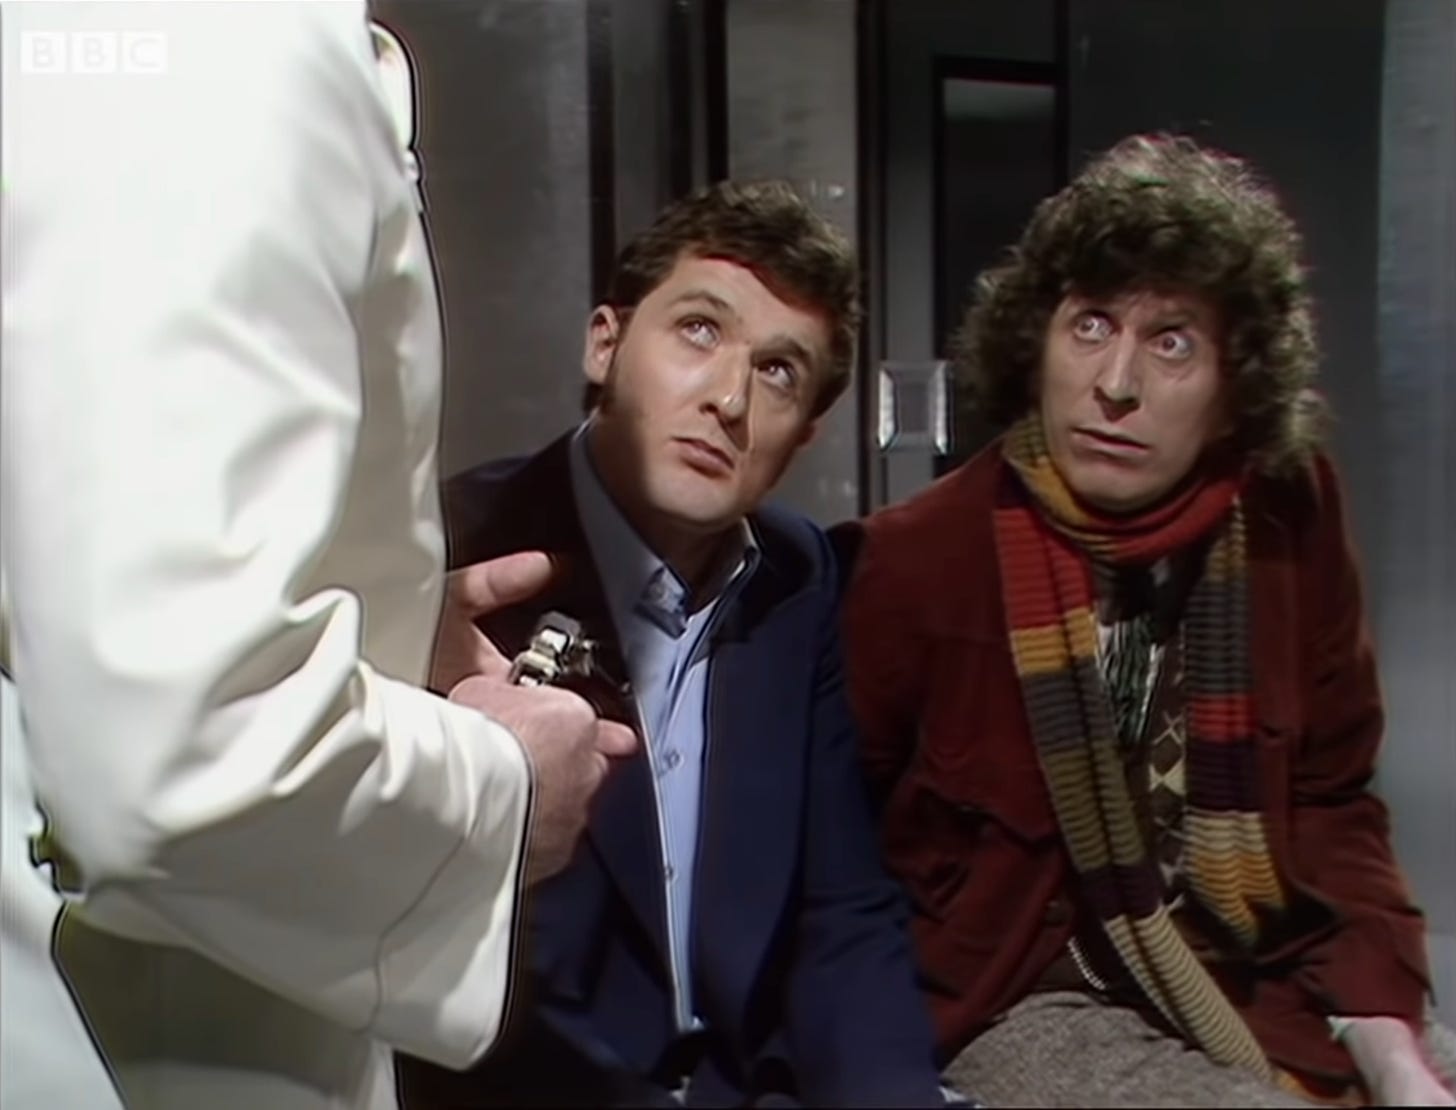 Ian Marter as Harry Sullivan (left) and Tom Baker as the Doctor (right) in DOCTOR WHO.